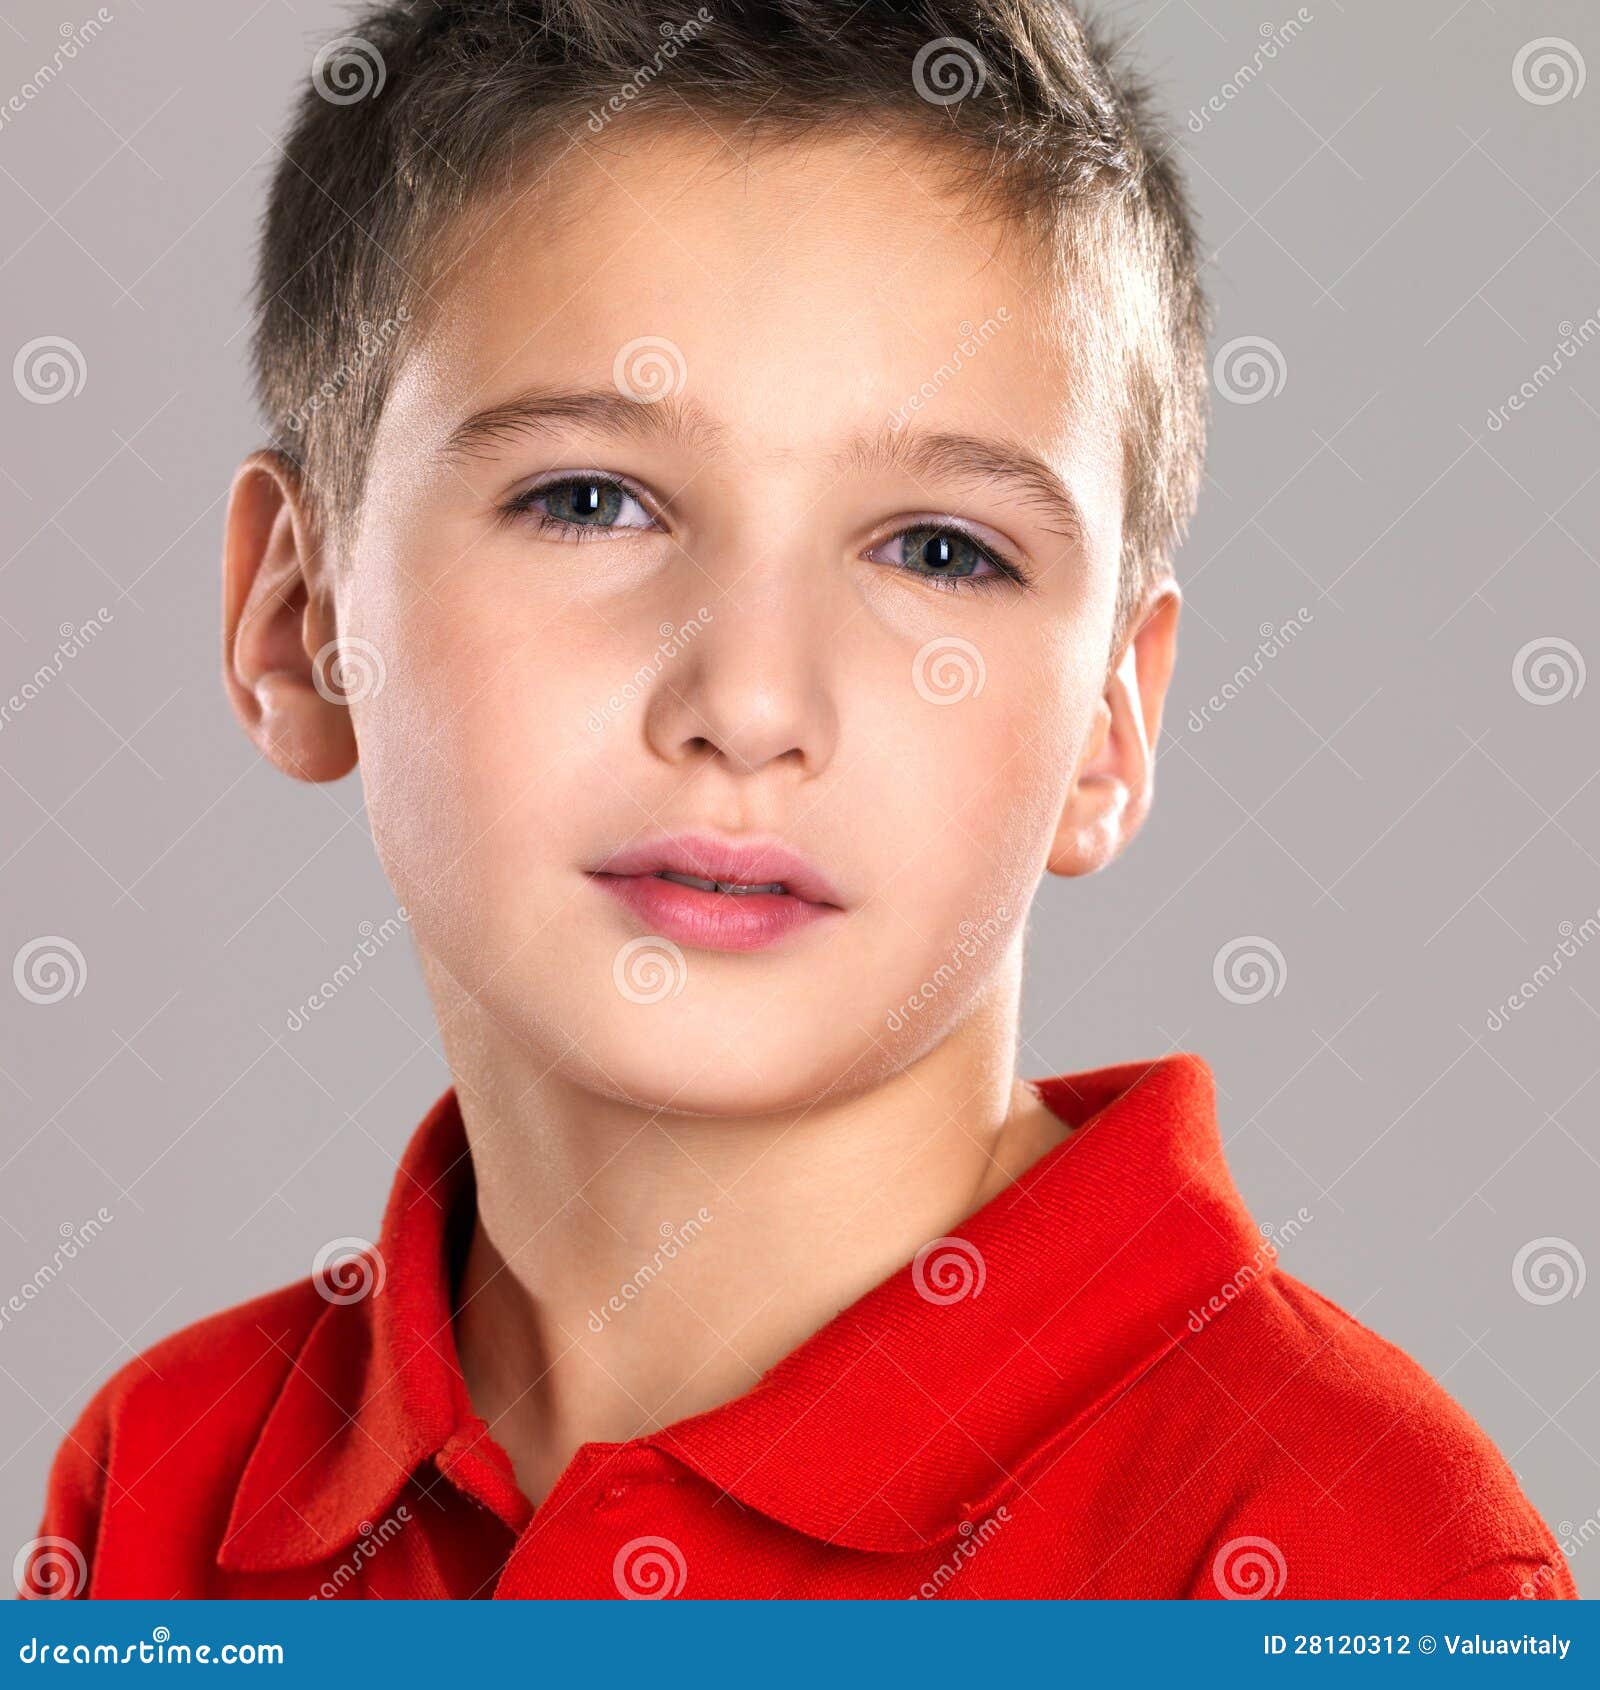 Portrait of adorable young beautiful boy Stock Photography - portrait-adorable-young-beautiful-boy-28120312